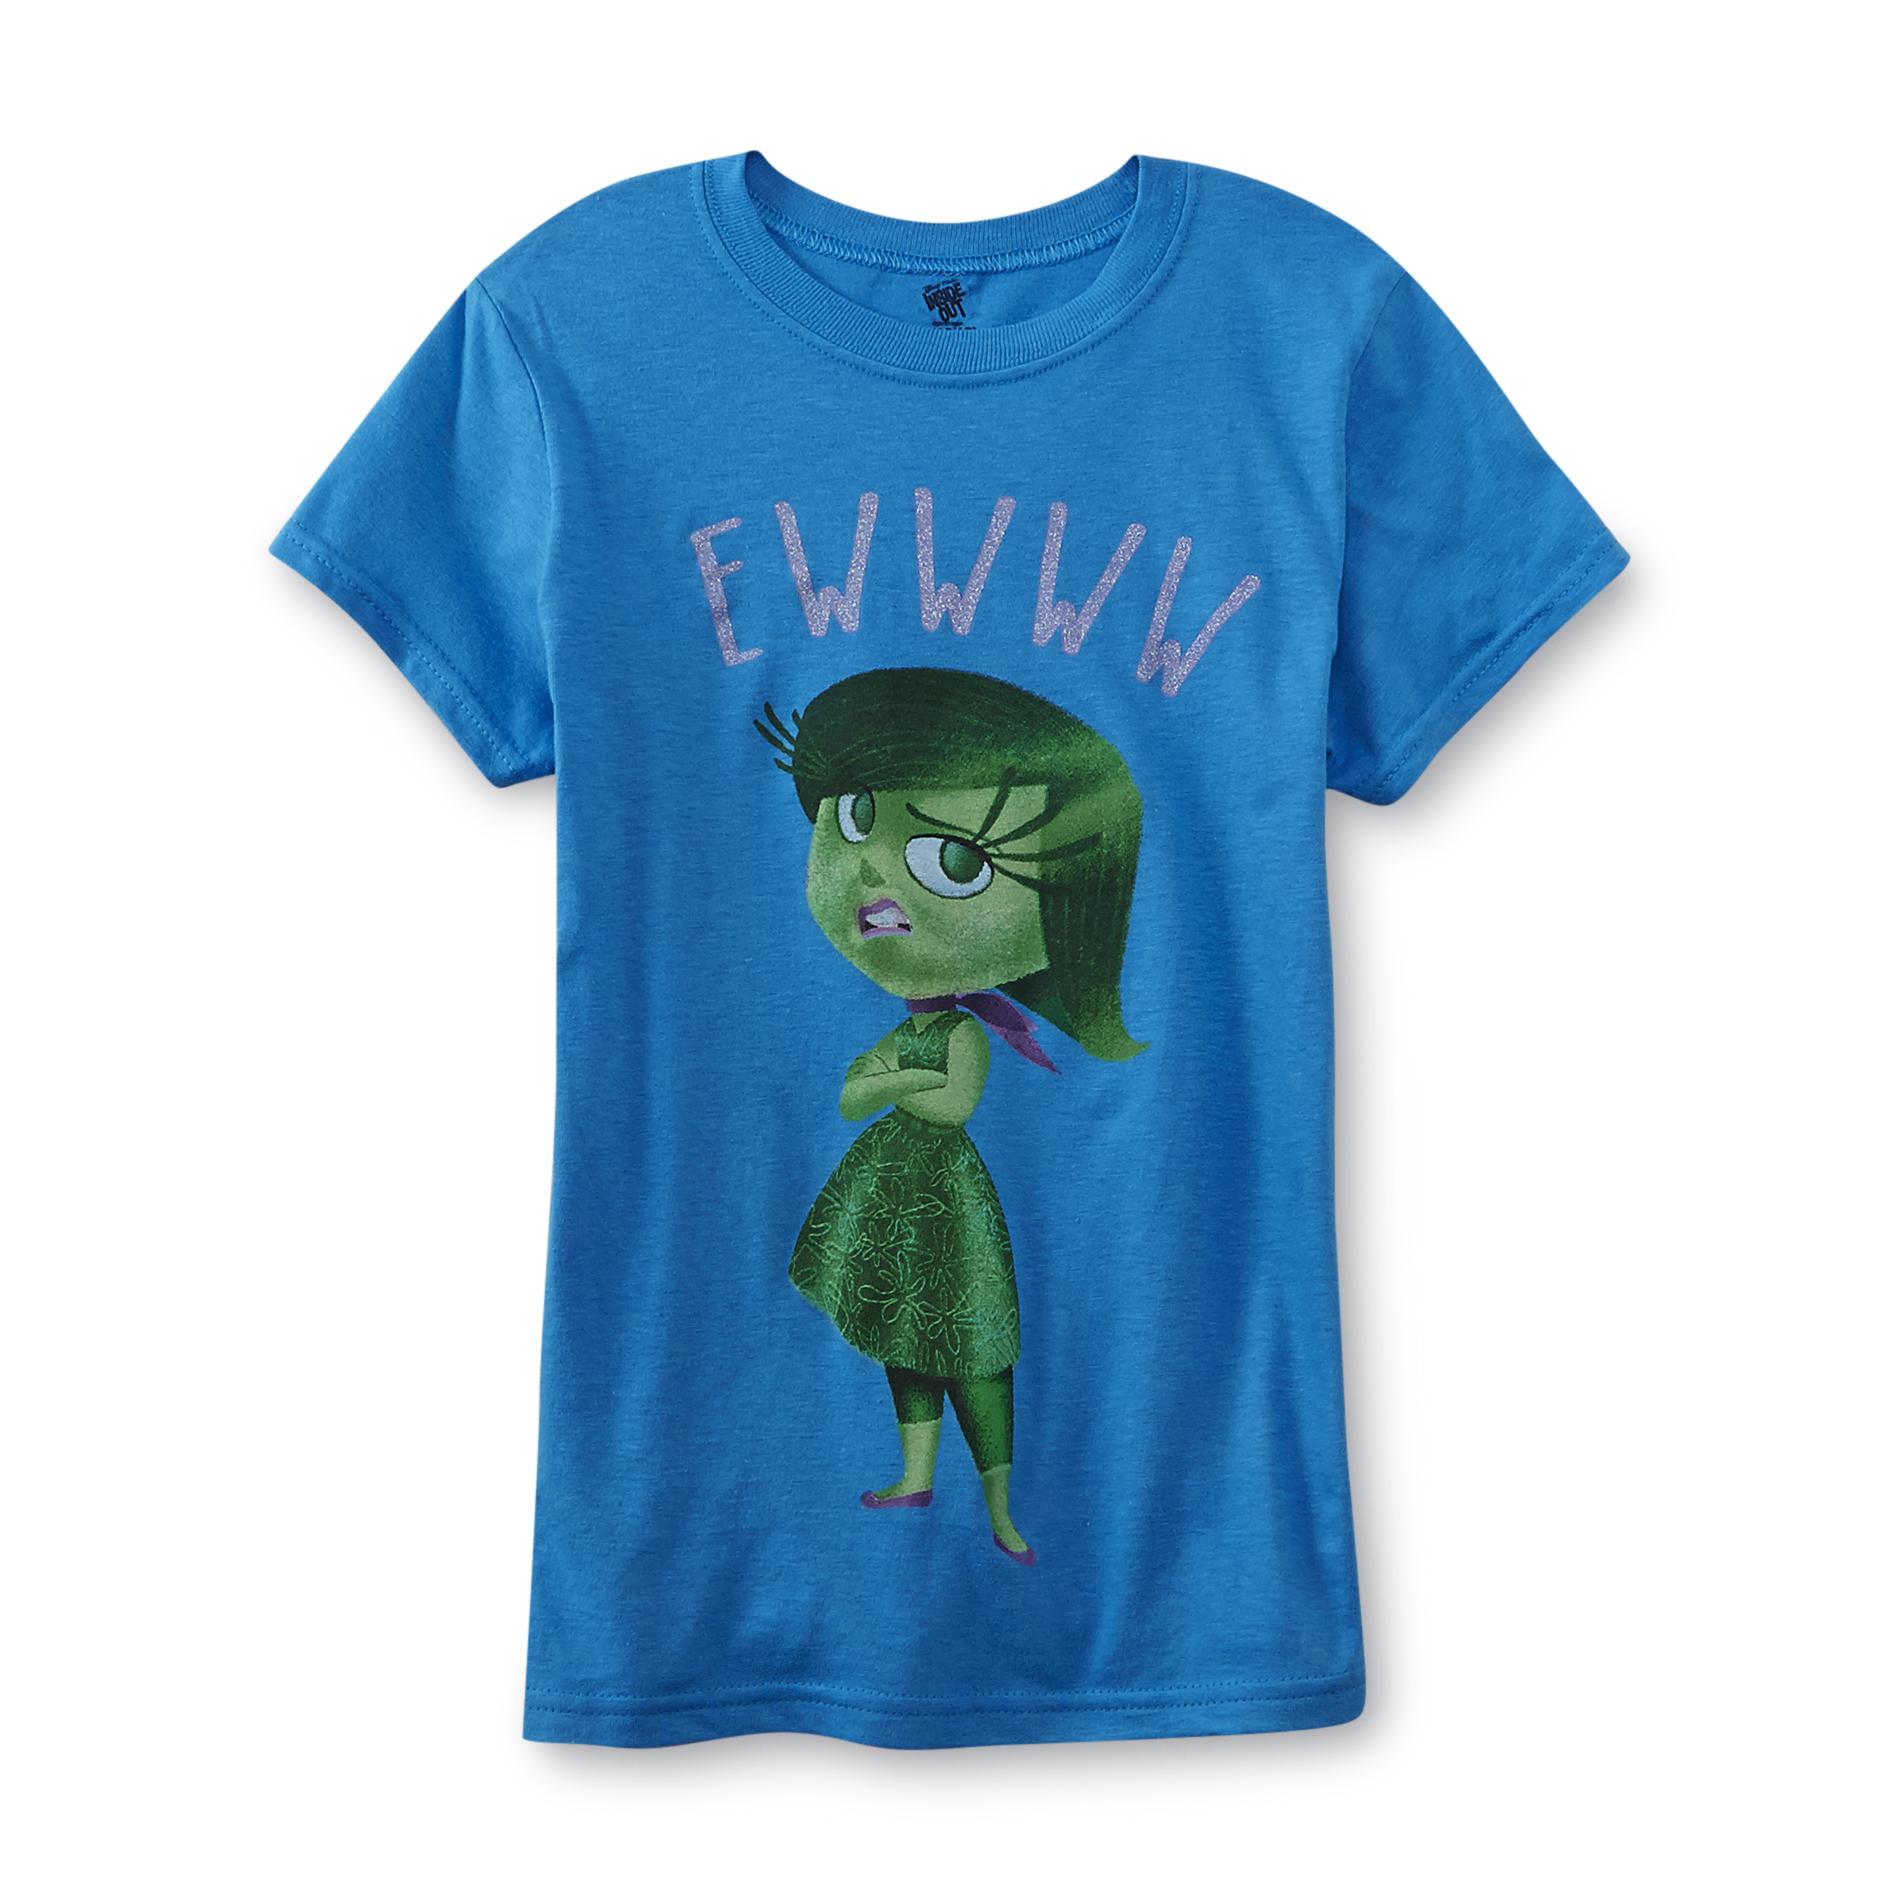 Disney Inside Out Girl's Graphic T-Shirt - Ewww